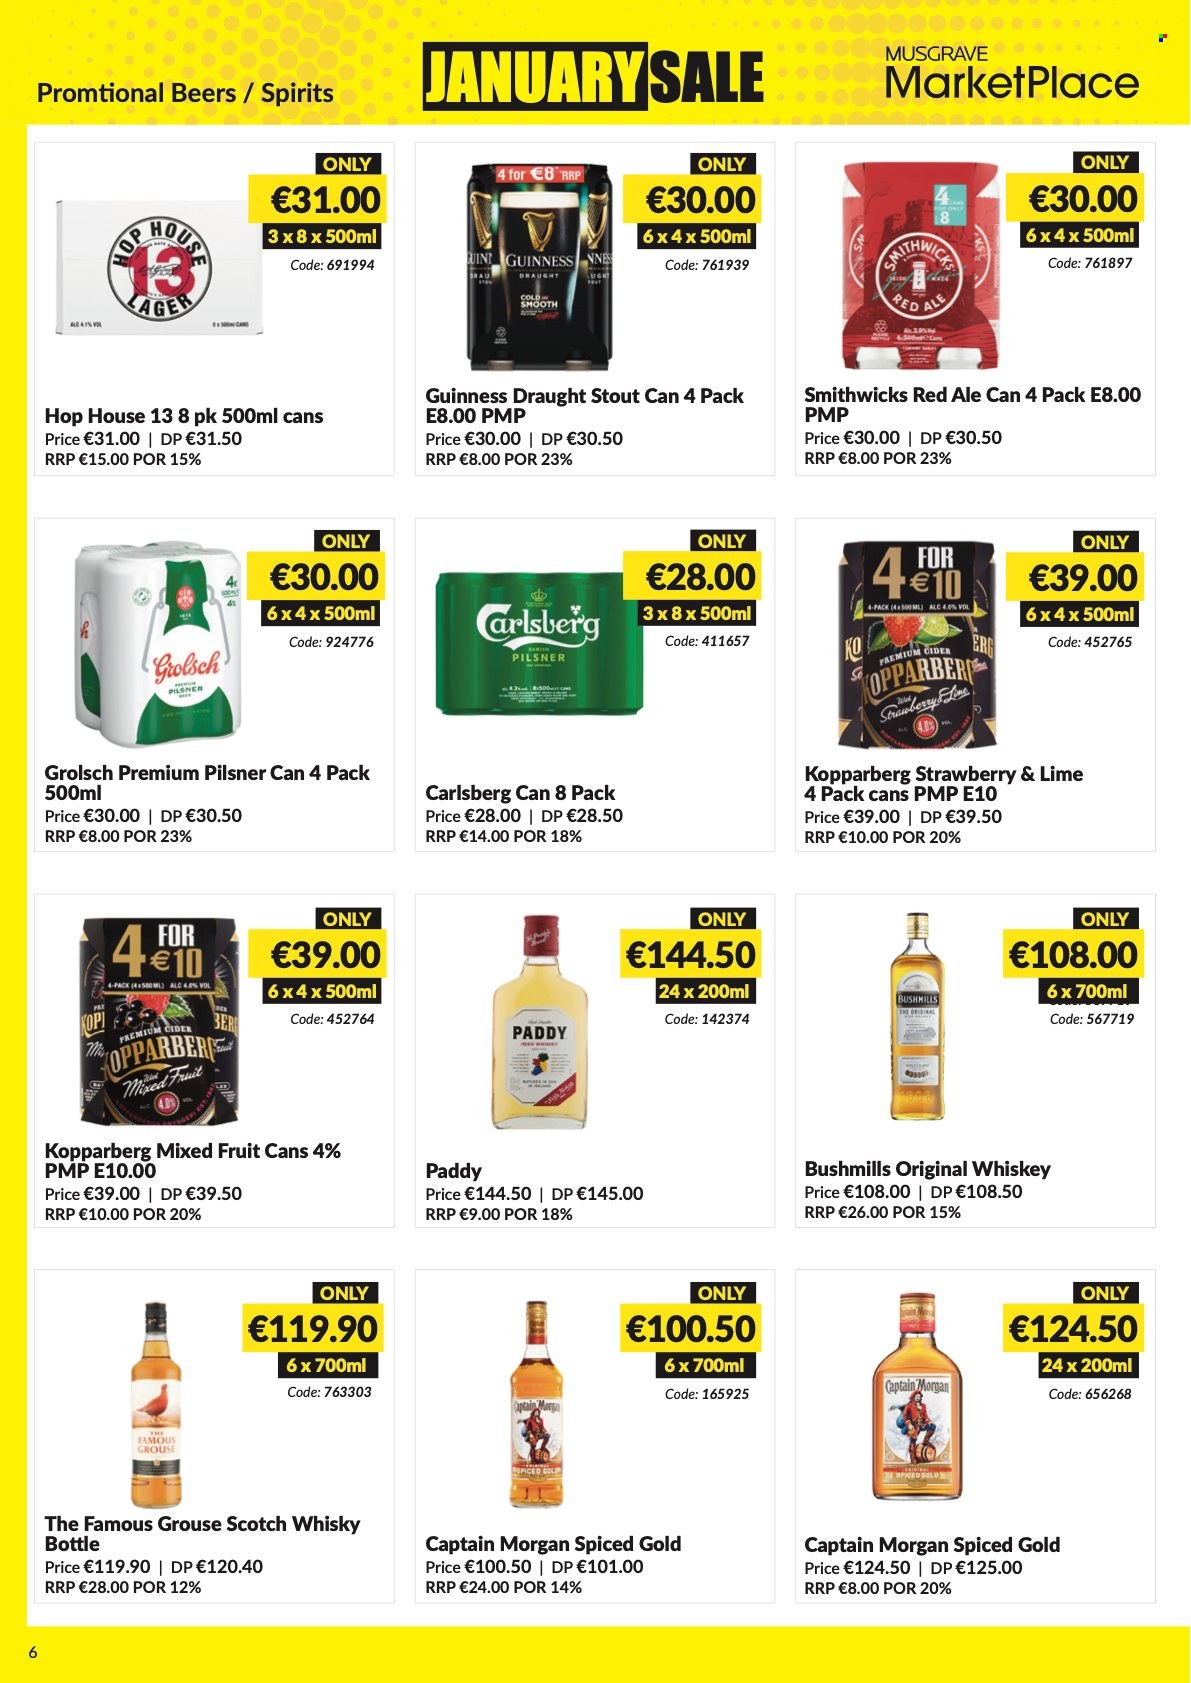 thumbnail - MUSGRAVE Market Place offer  - 02.01.2022 - 12.02.2022 - Sales products - Captain Morgan, whiskey, Kopparberg, The Famous Grouse, scotch whisky, whisky, Carlsberg, Guinness, Grolsch. Page 6.